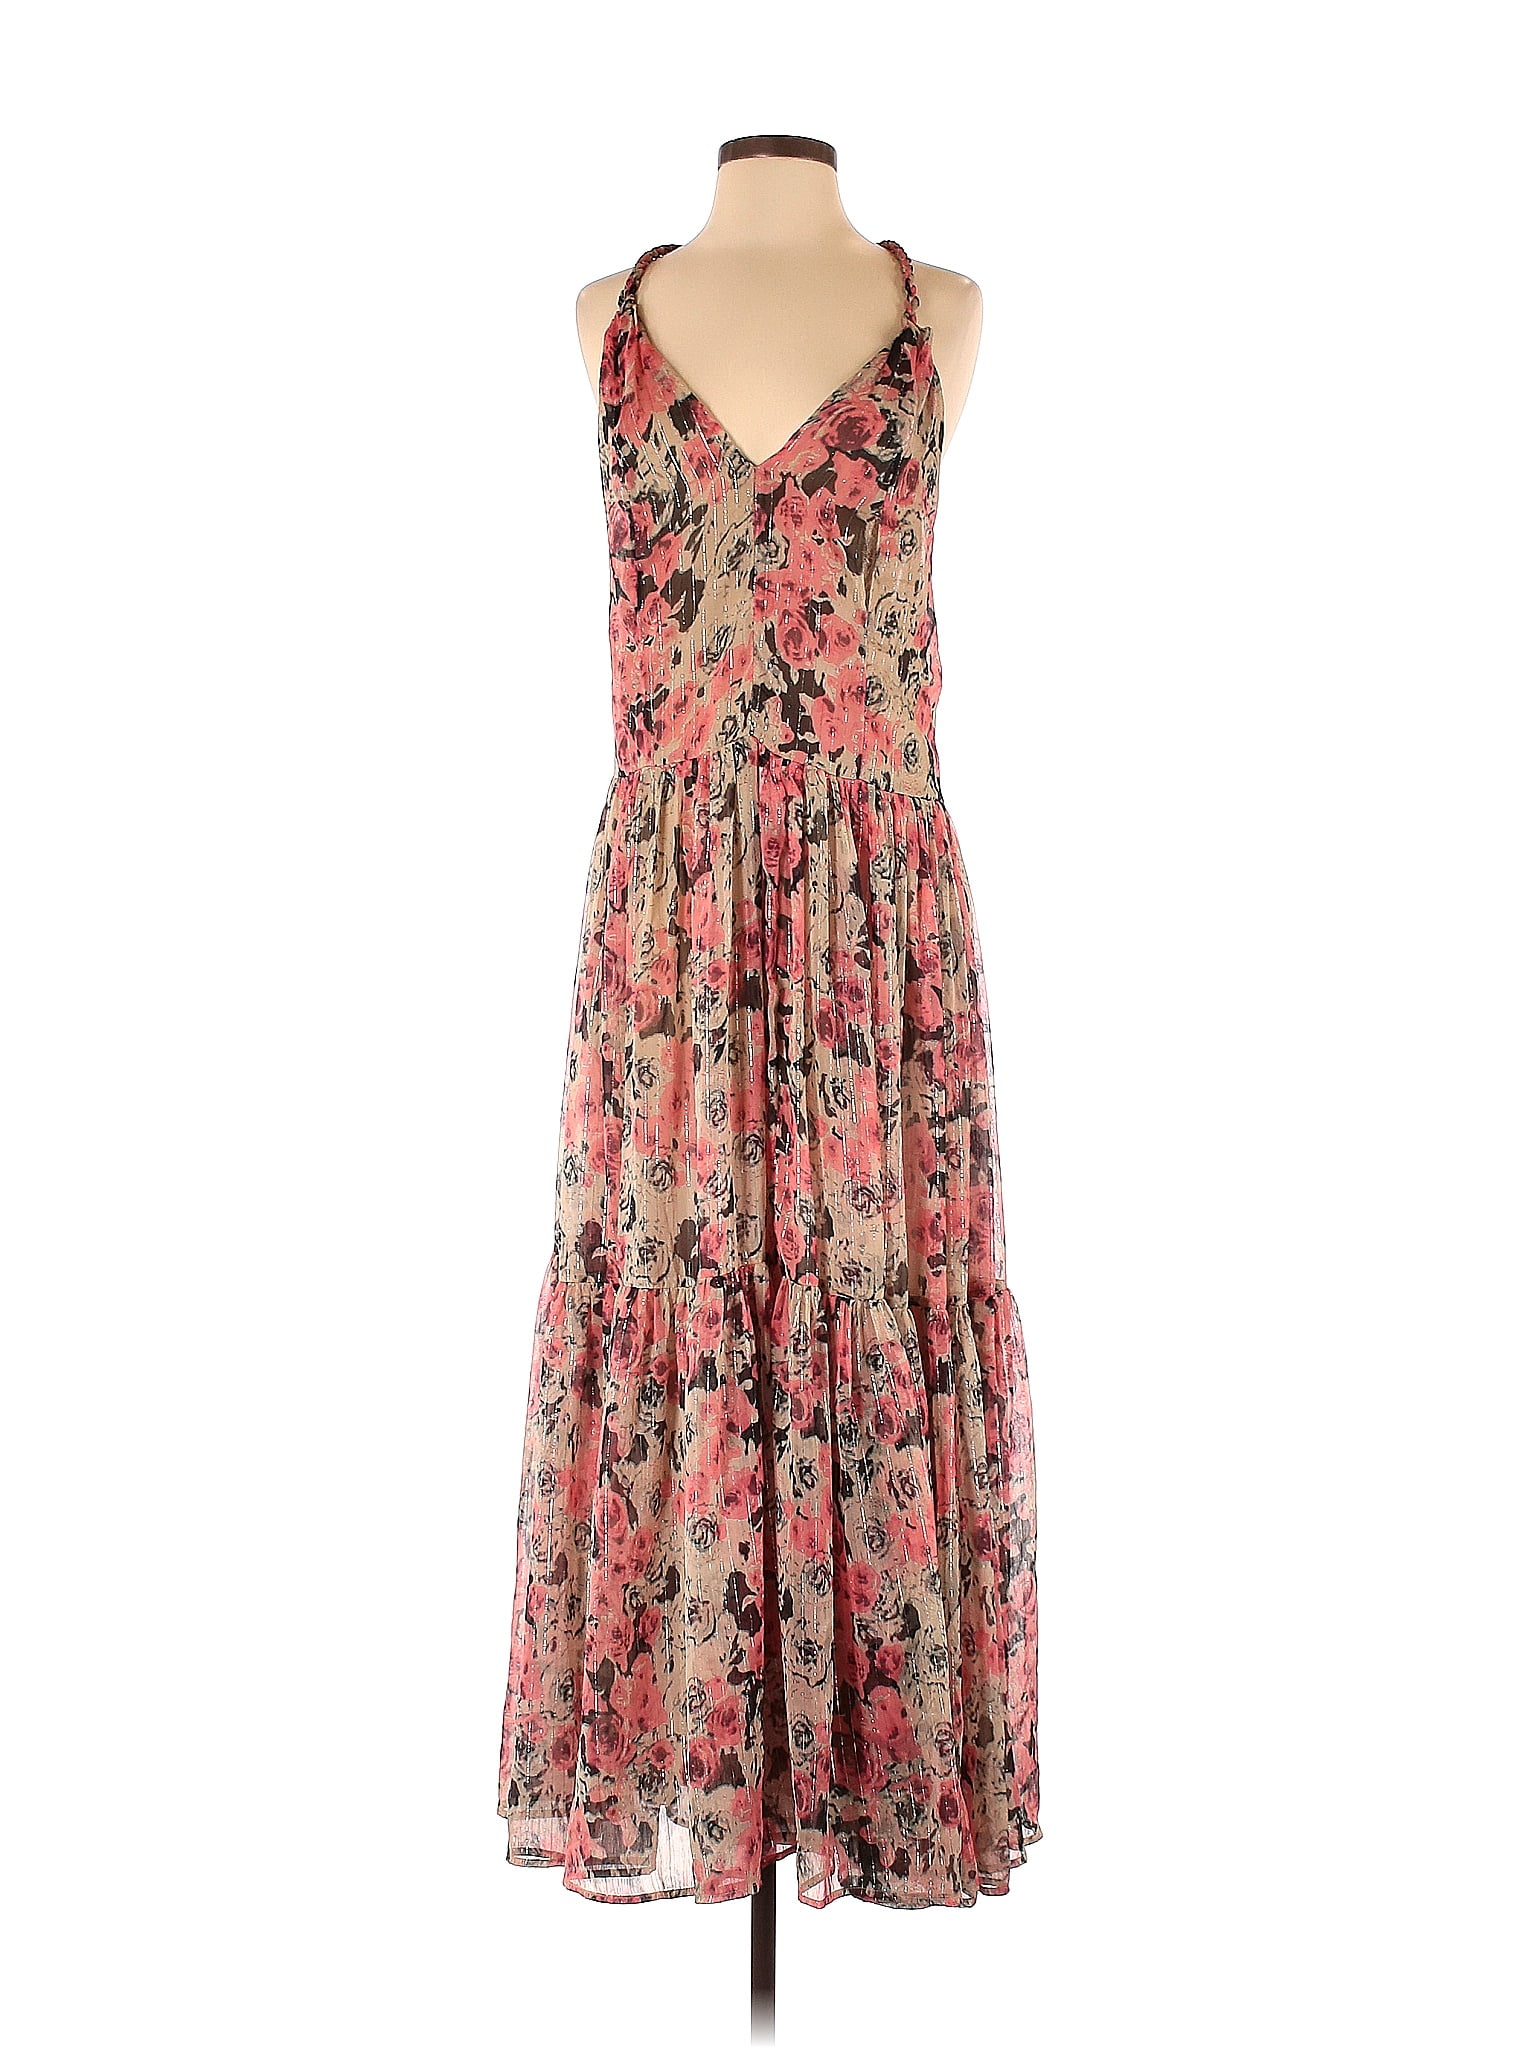 ASTR The Label Floral Multi Color Pink Casual Dress Size S - 56% off ...